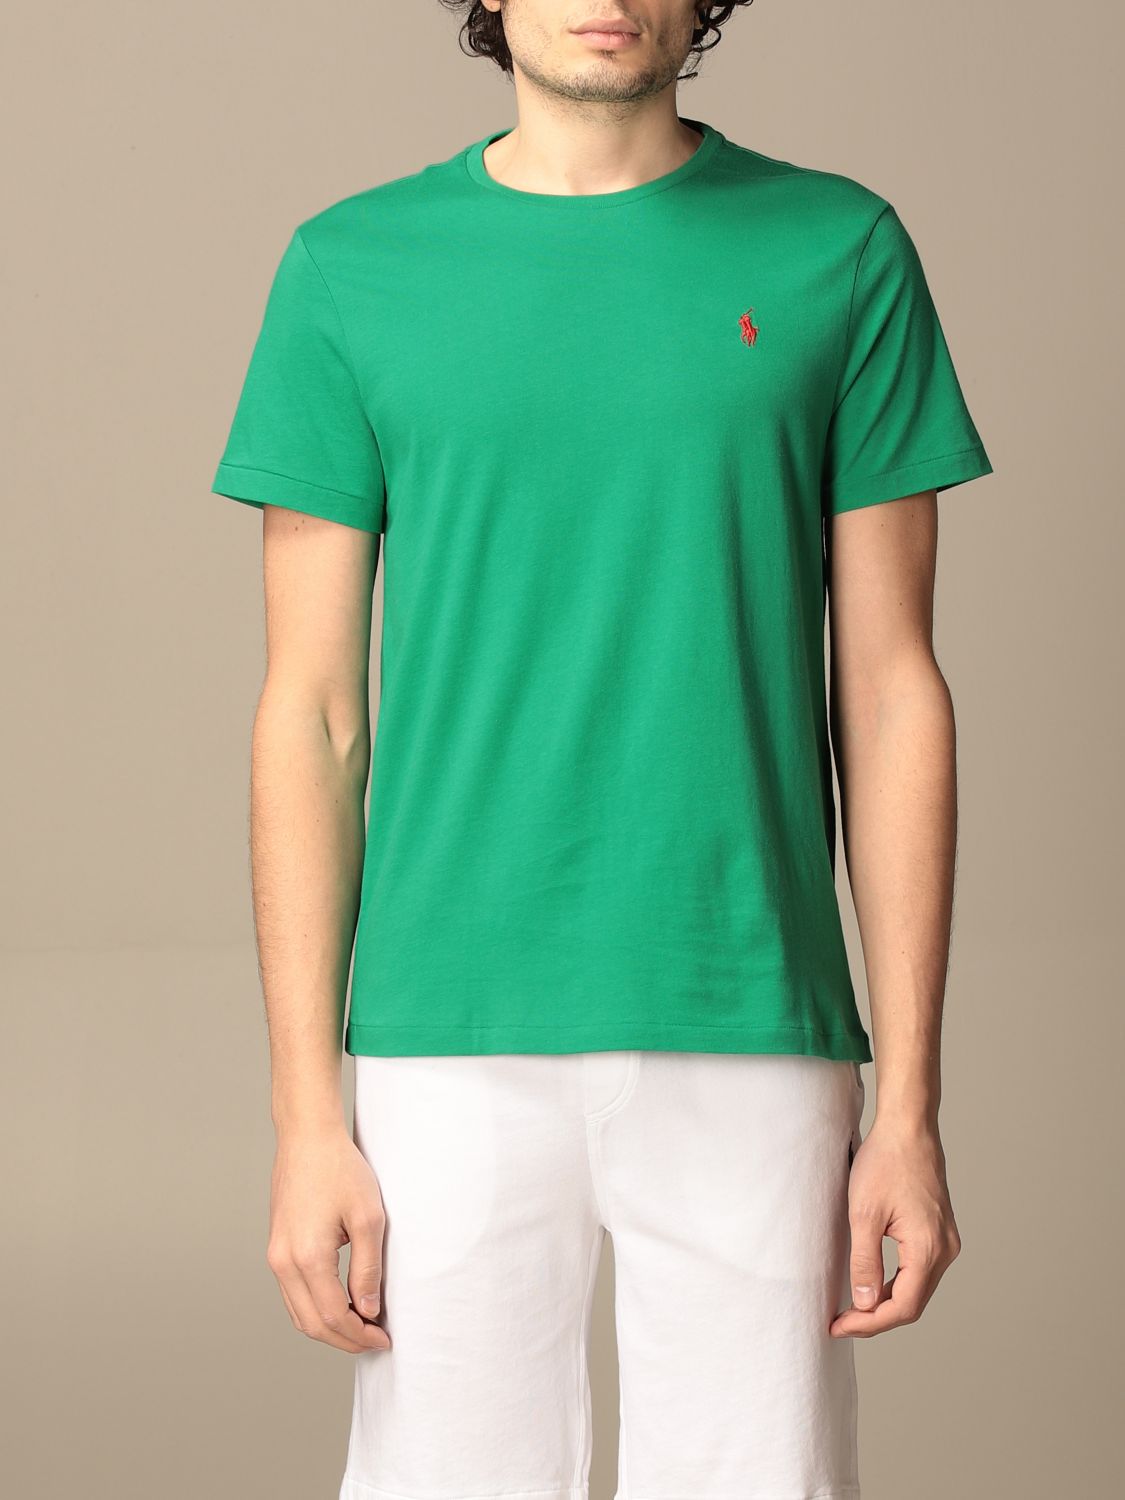 Polo Ralph Lauren Outlet: cotton t-shirt with logo - Green | Polo Ralph  Lauren t-shirt 710671438 online on 